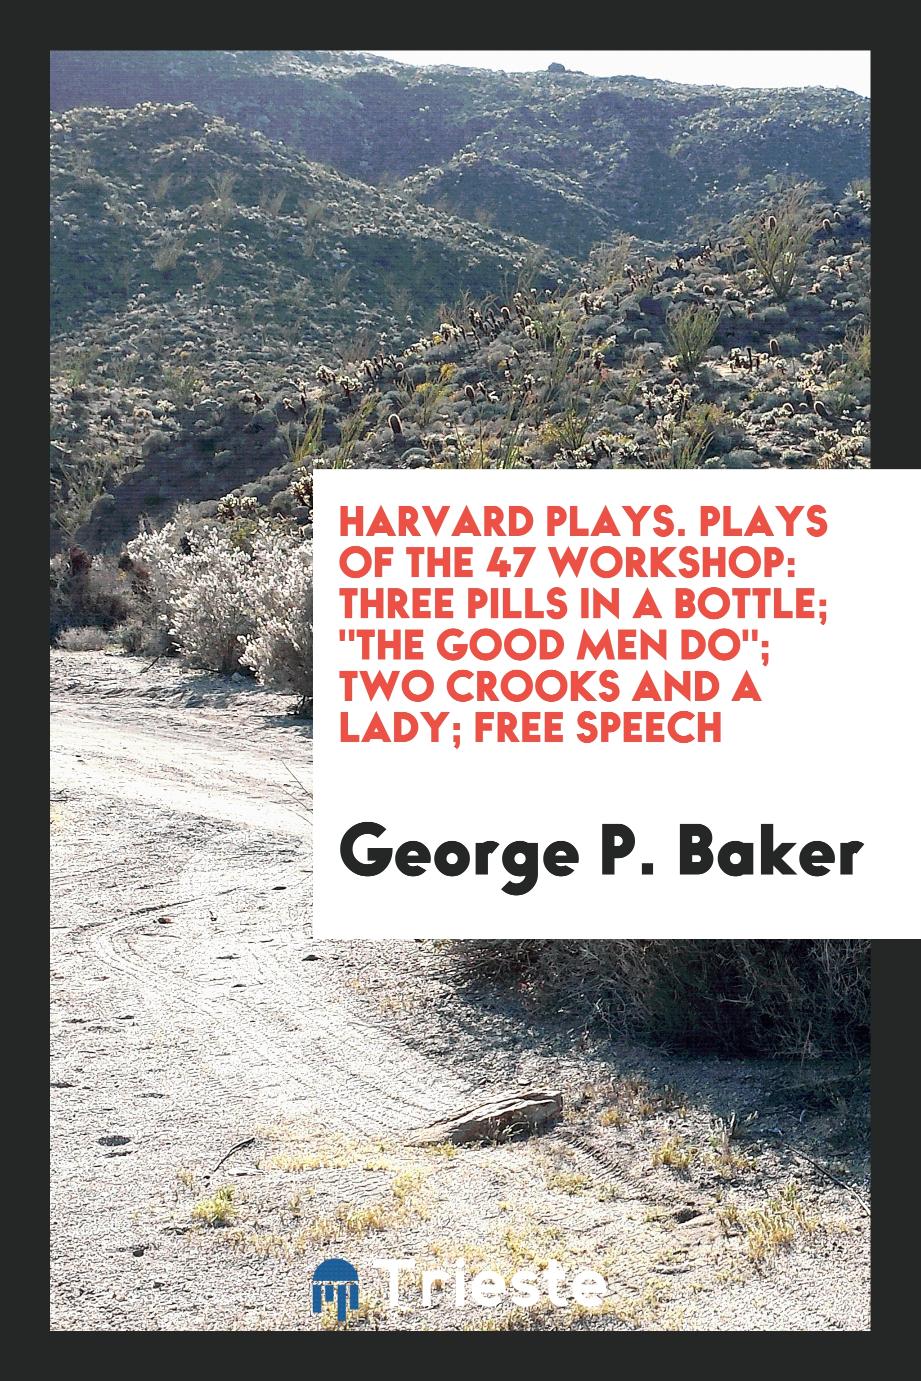 Harvard Plays. Plays of the 47 Workshop: Three Pills in a Bottle; "The Good Men Do"; Two Crooks and a Lady; Free Speech